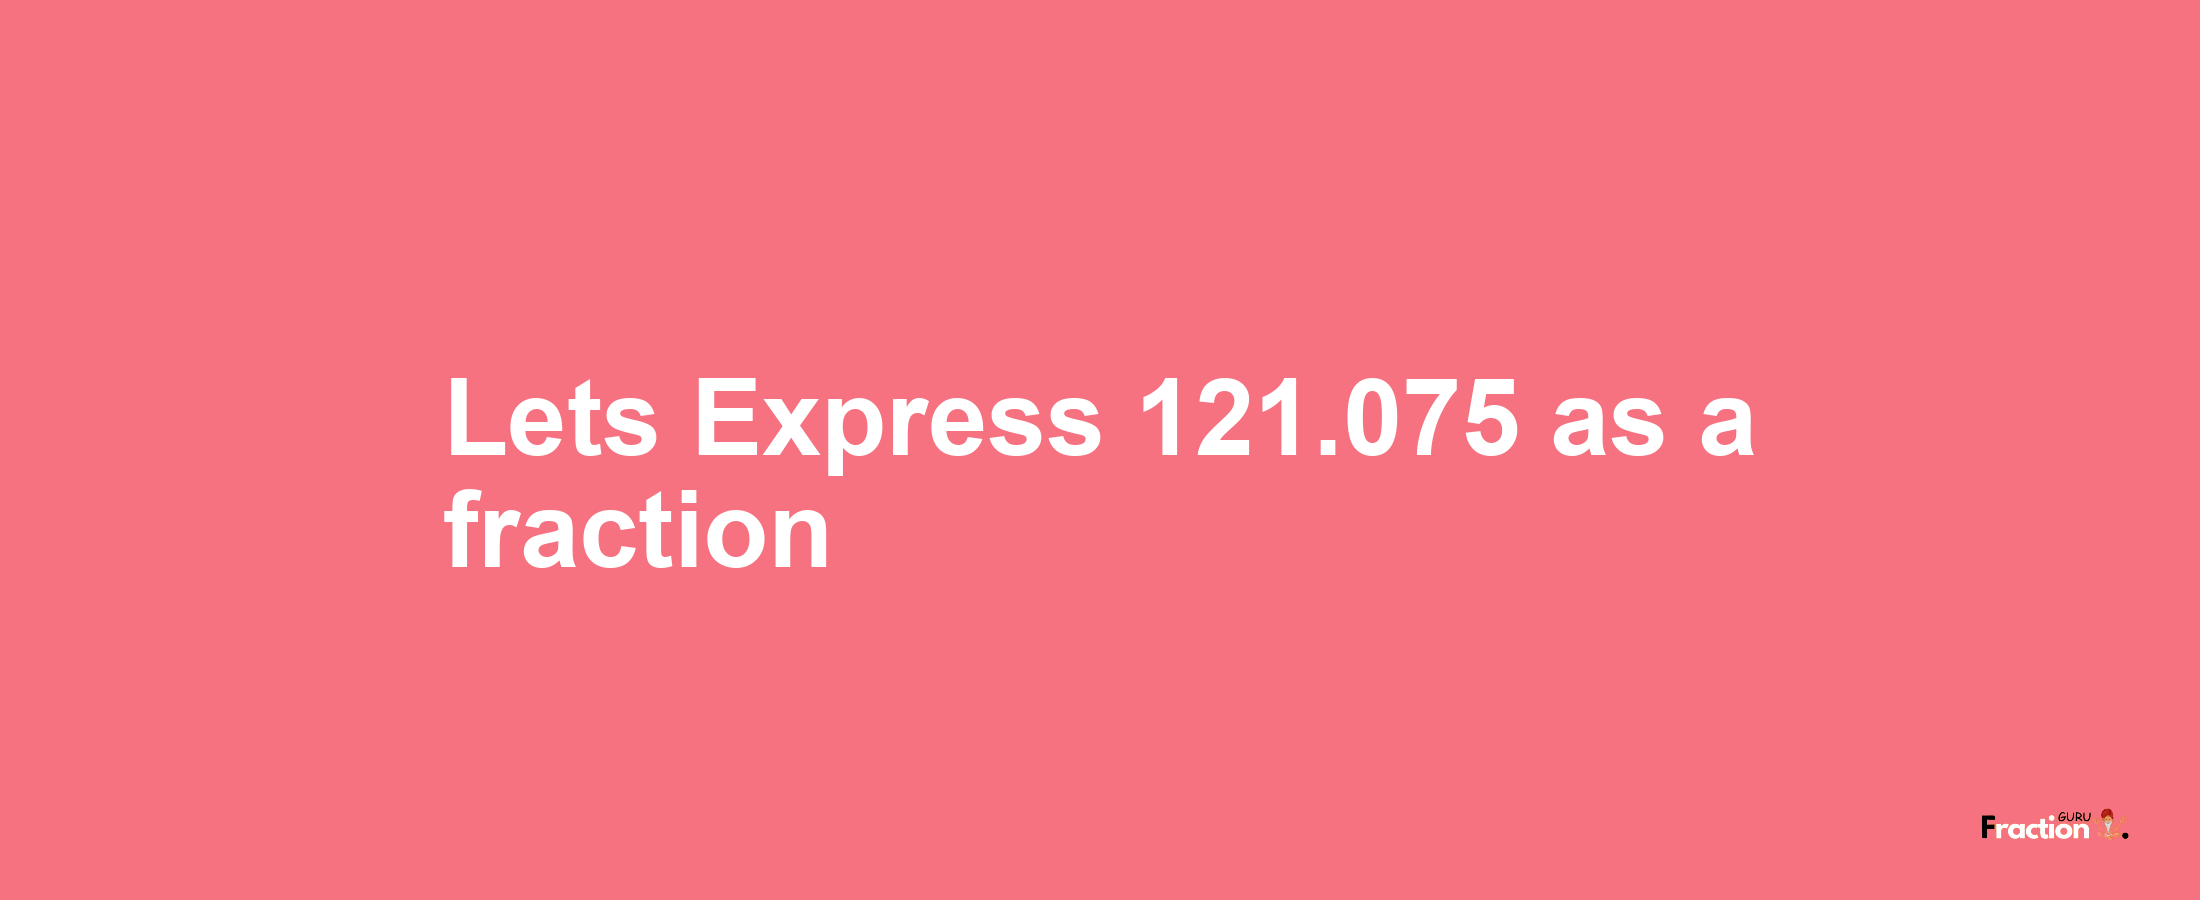 Lets Express 121.075 as afraction